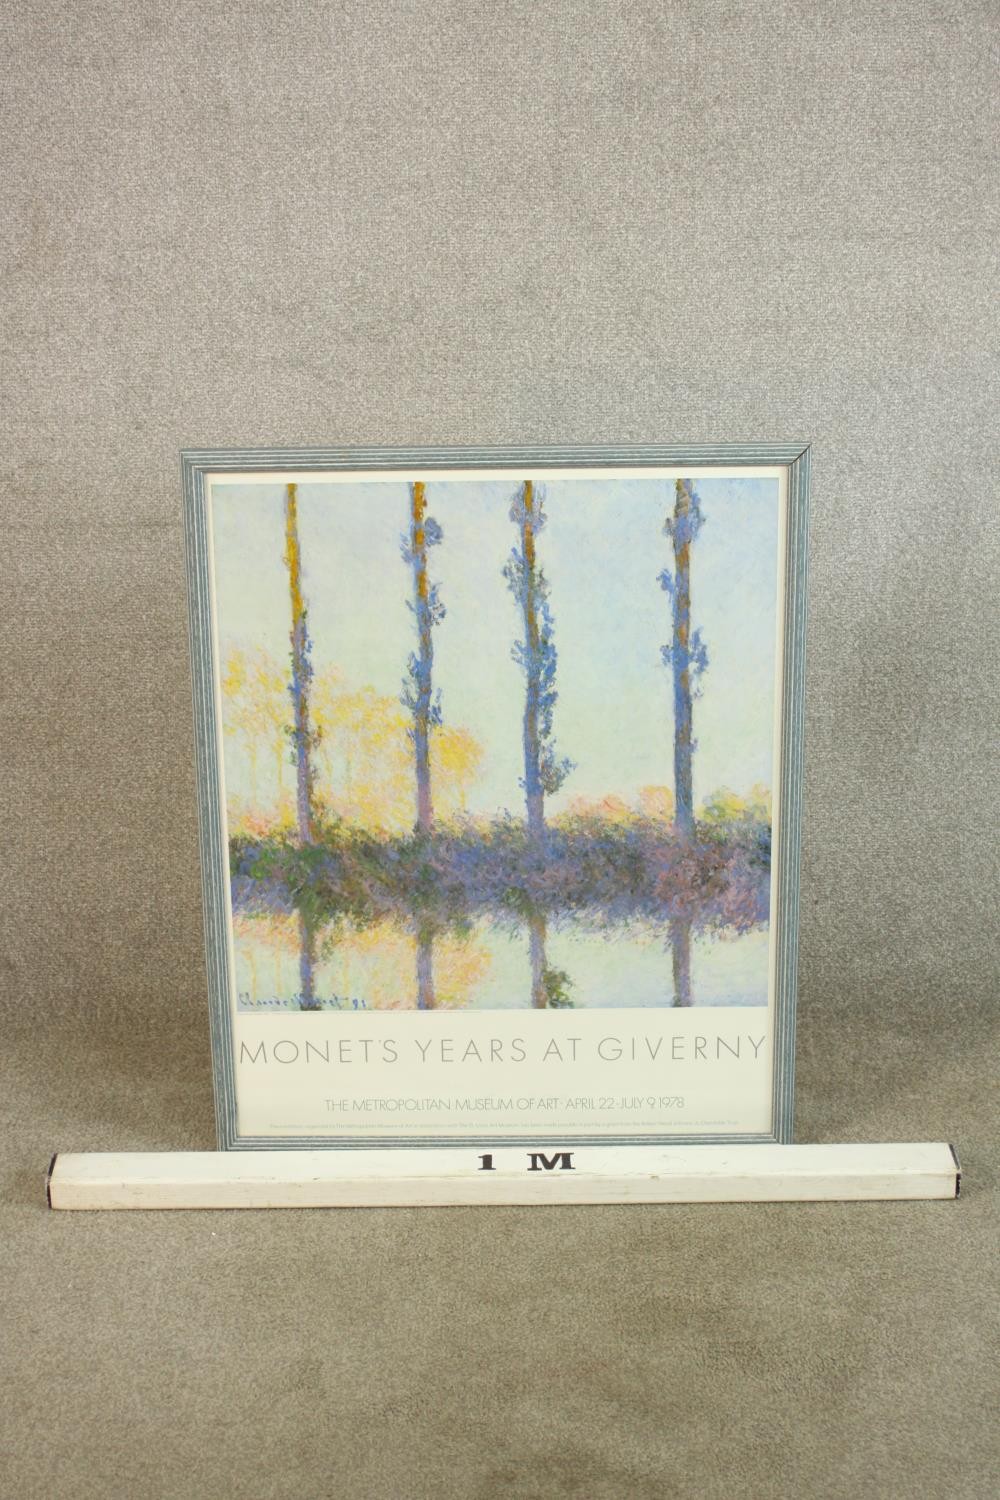 Monet's Years at Giverny, a mid 20th century exhibition poster from the Metropolitan Museum of Art - Image 3 of 6